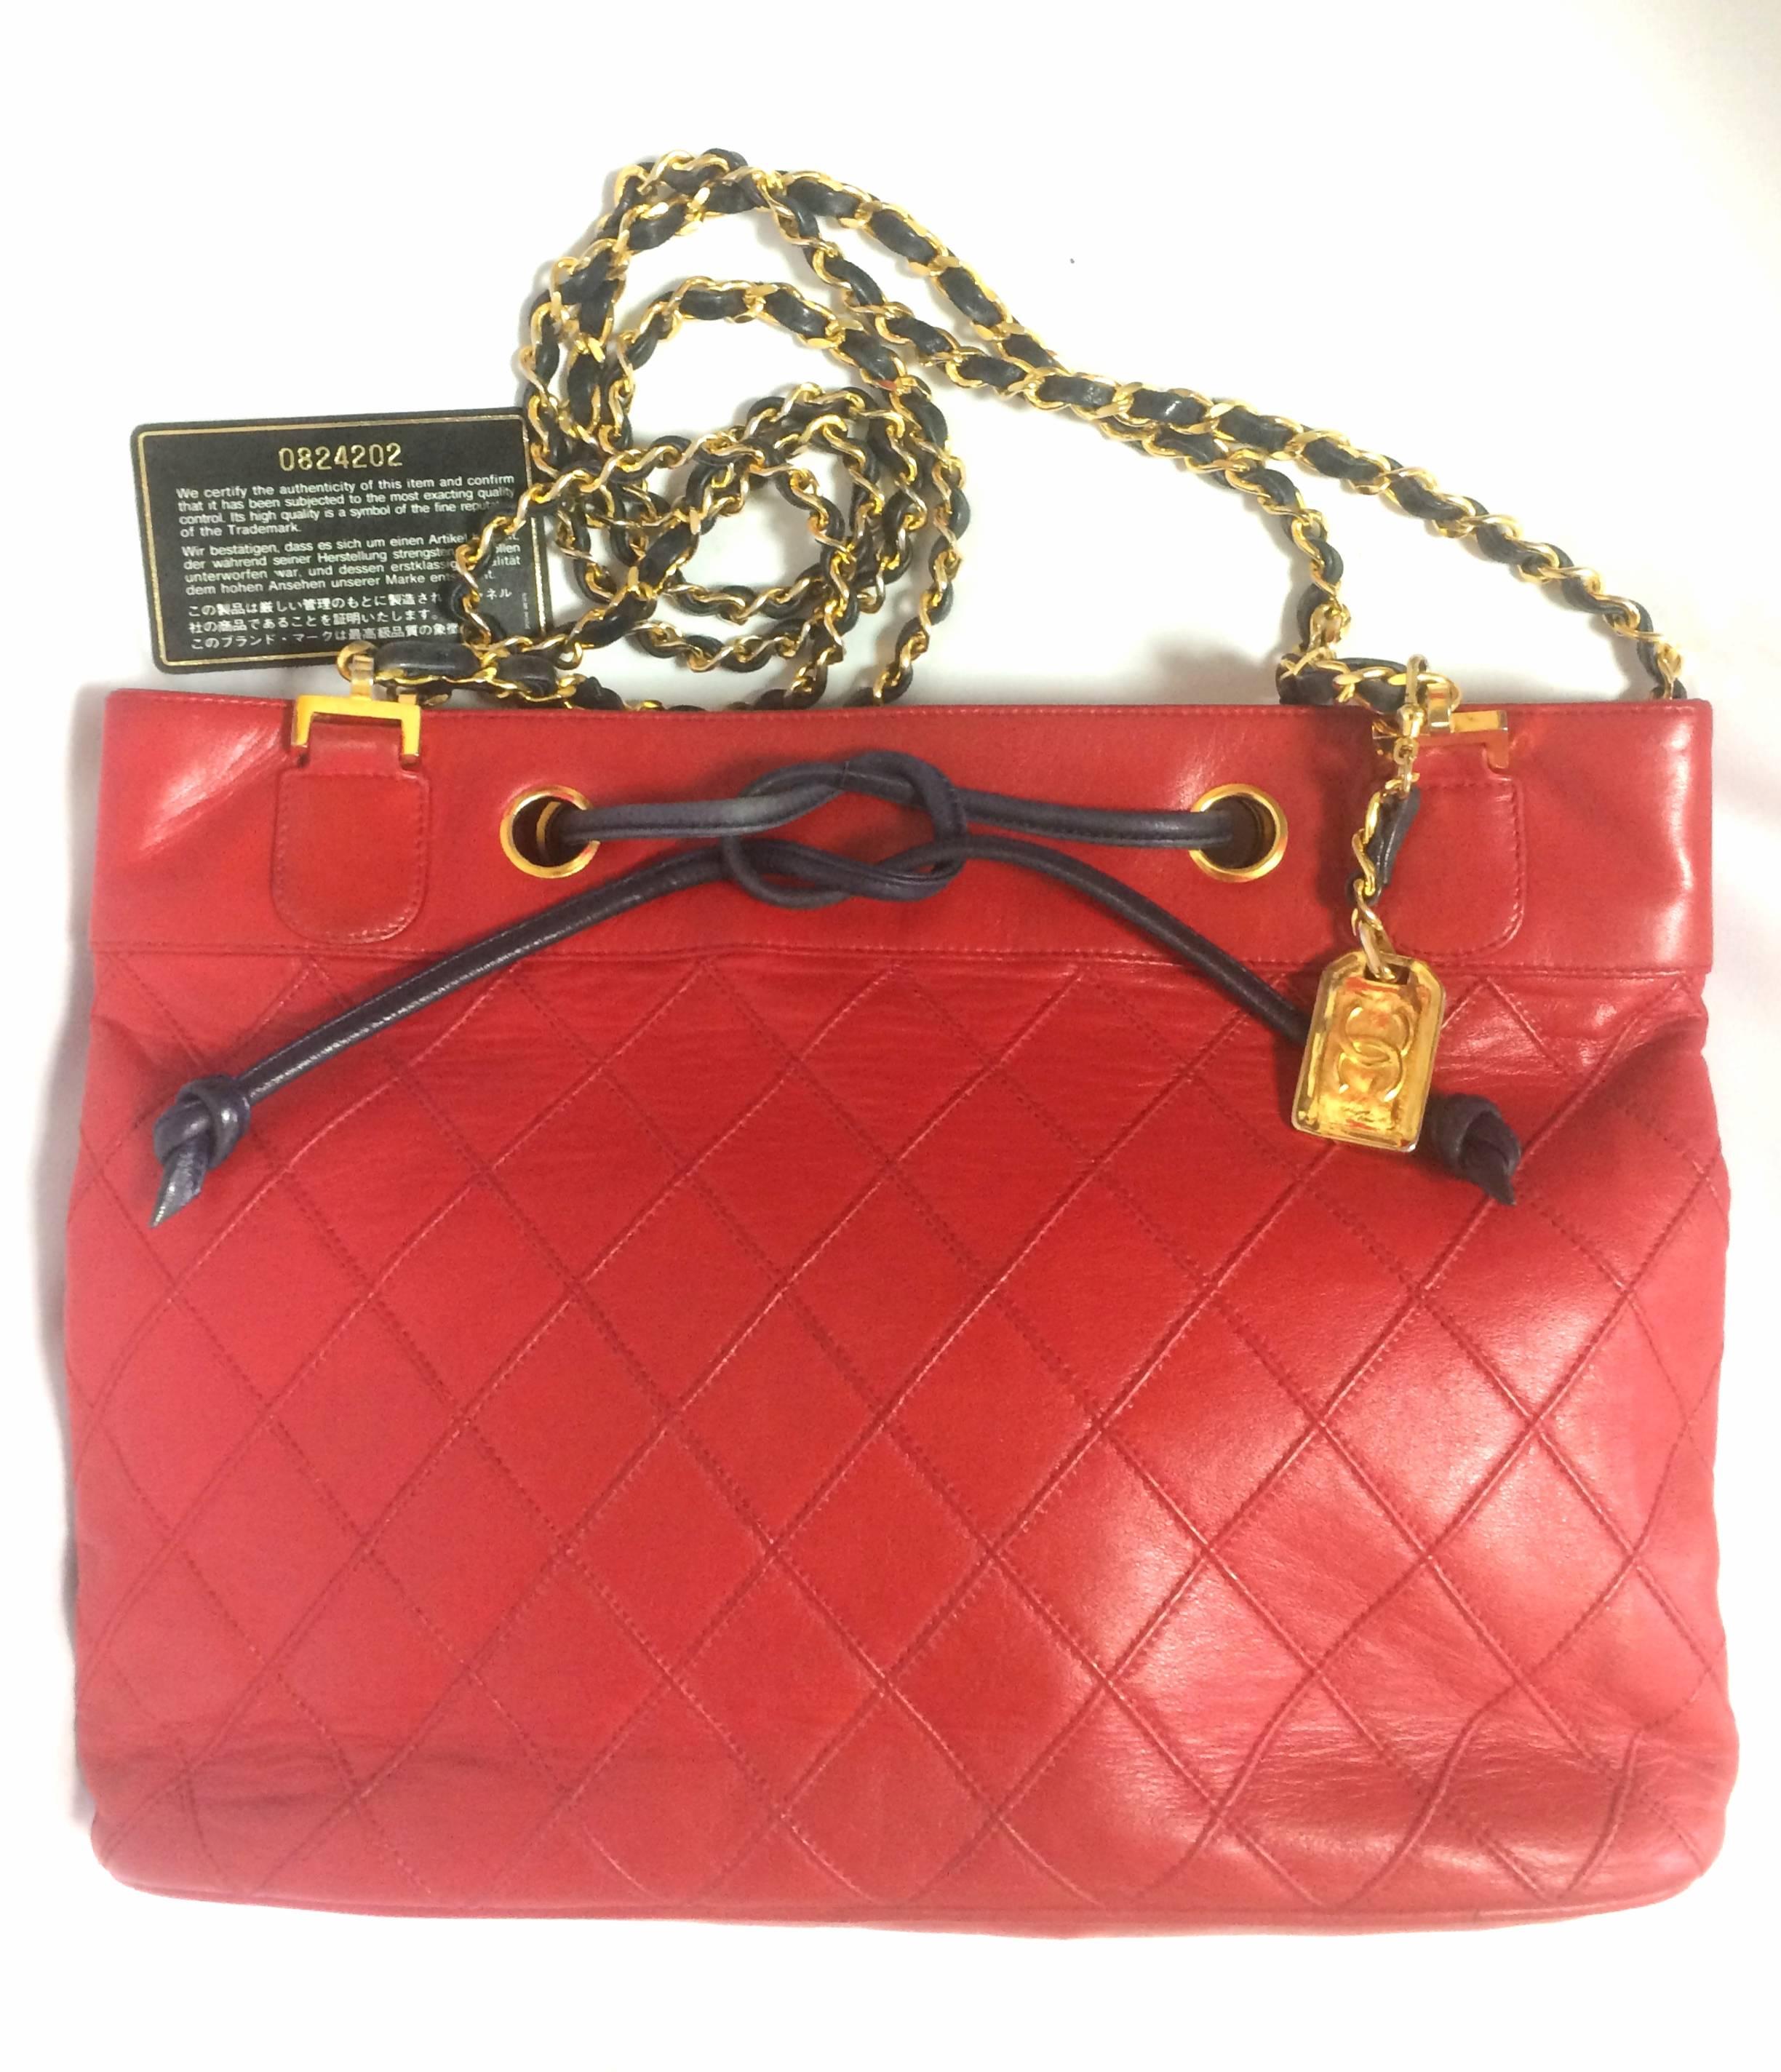 Vintage CHANEL classic tote bag in red leather with golden chain and navy straps For Sale 5